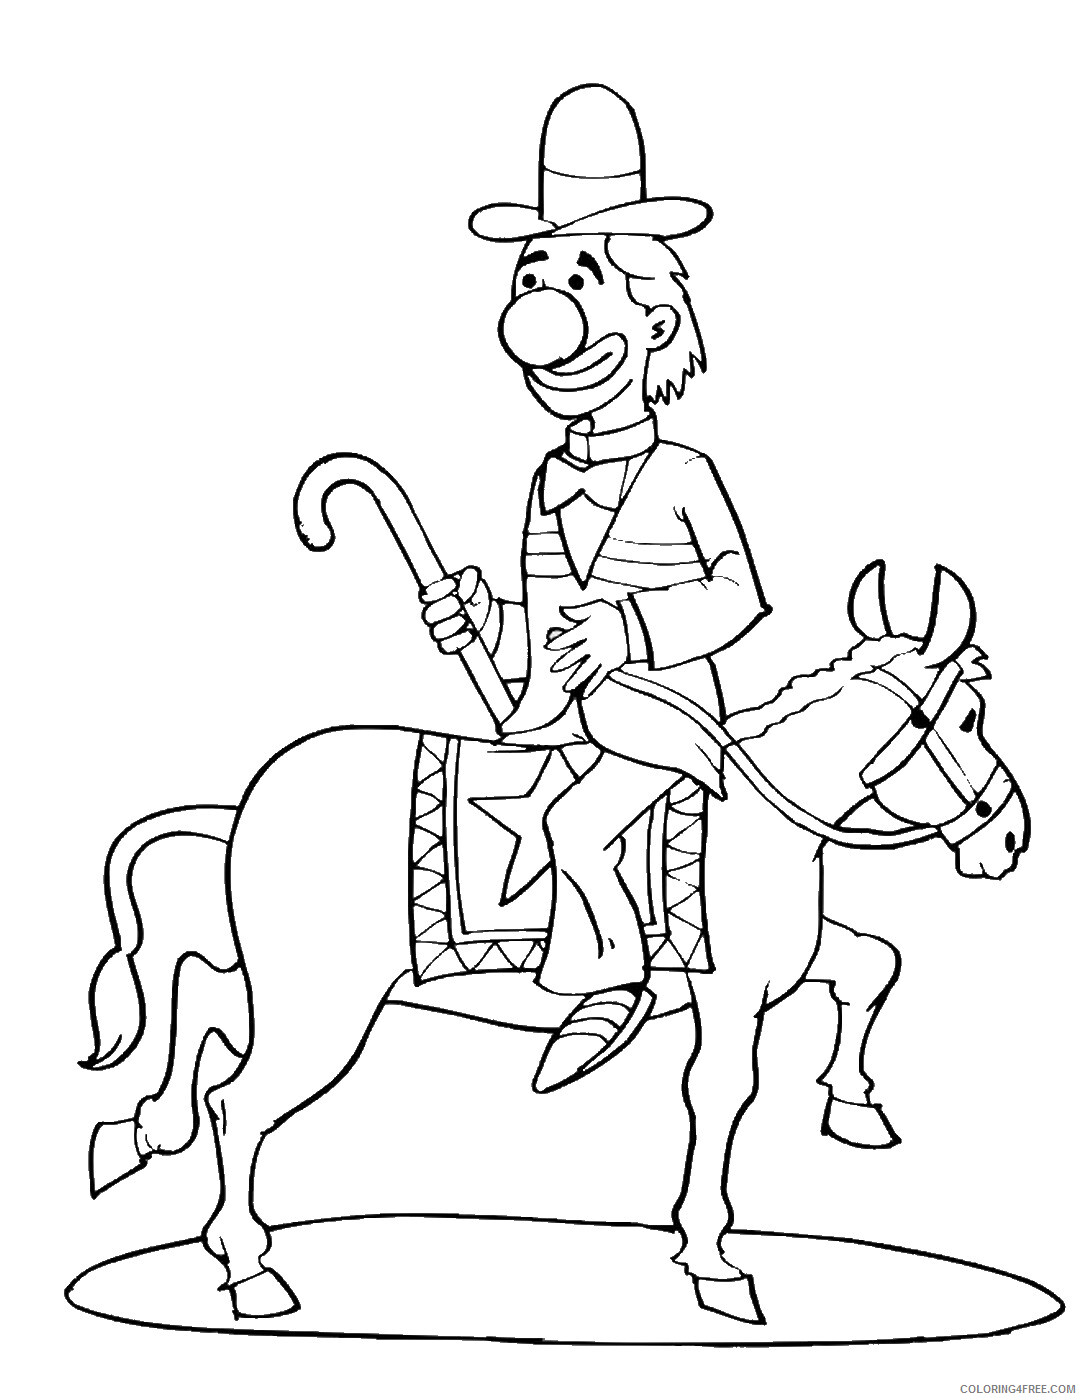 Circus Coloring Pages circus_horsec3 Printable 2021 1544 Coloring4free